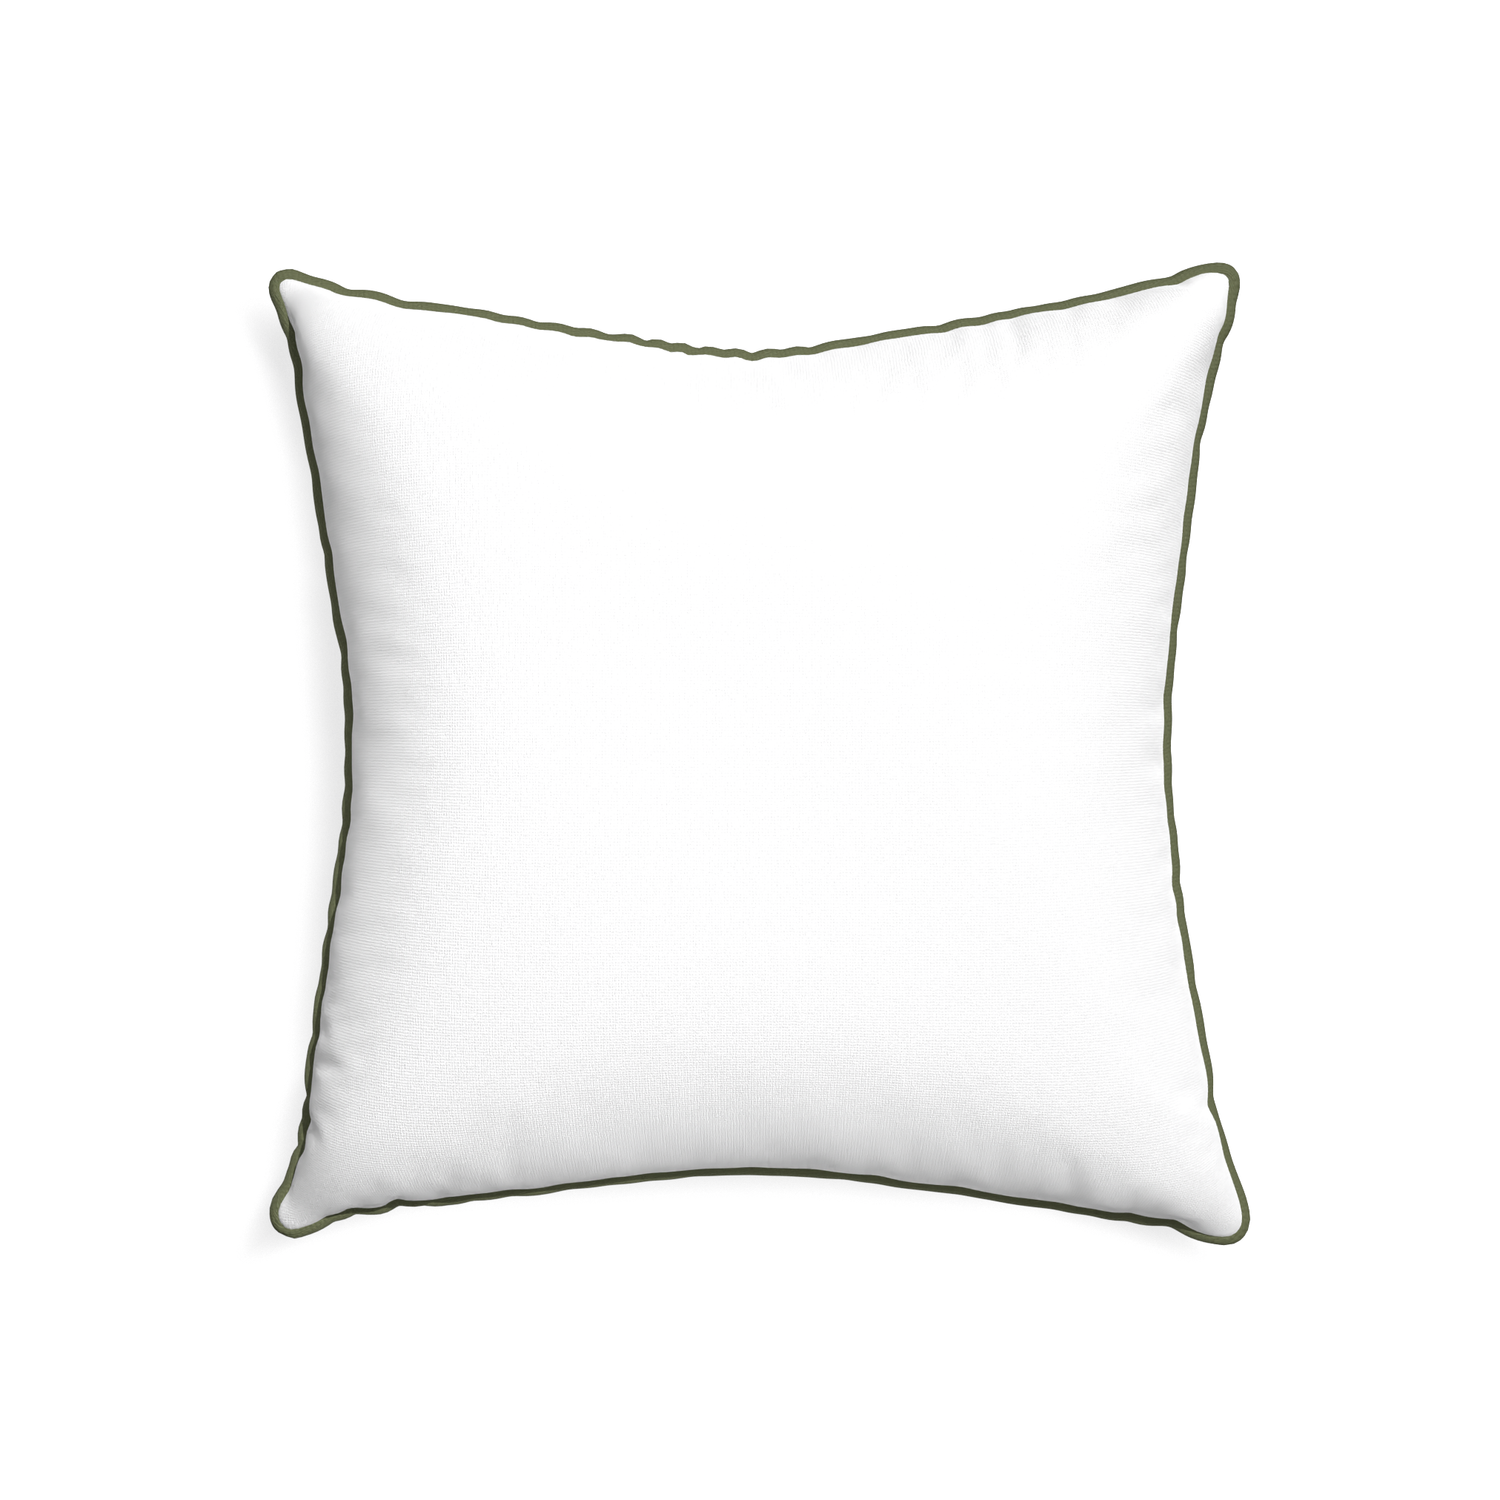 22-square snow custom pillow with f piping on white background